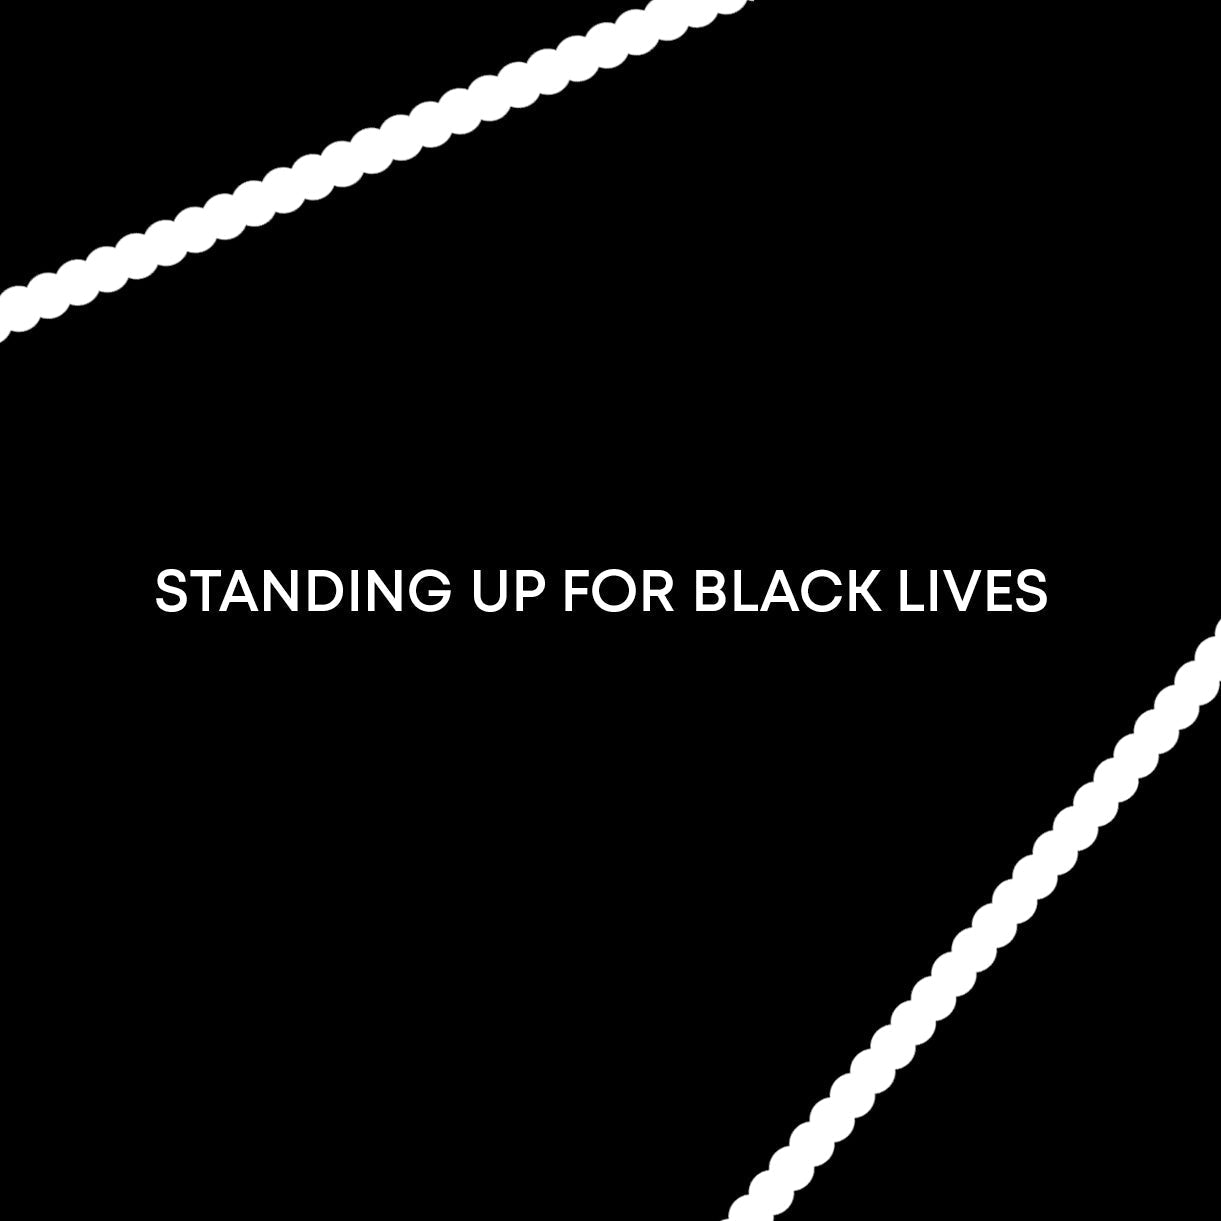 Standing up for black lives - 35 Thousand